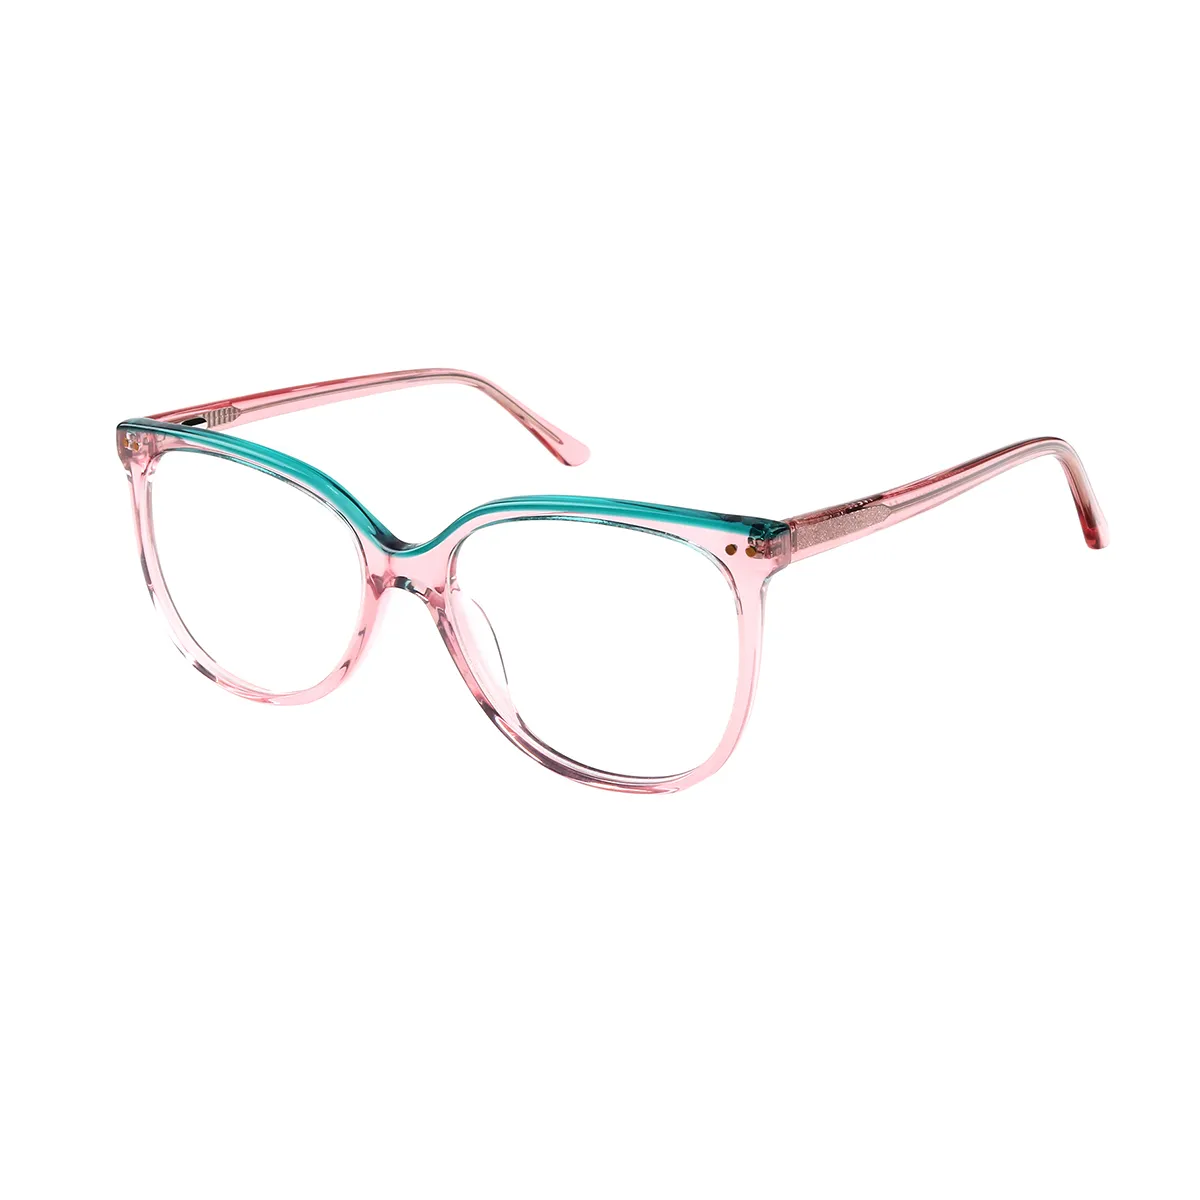 Tessie - Square Pink Glasses for Women